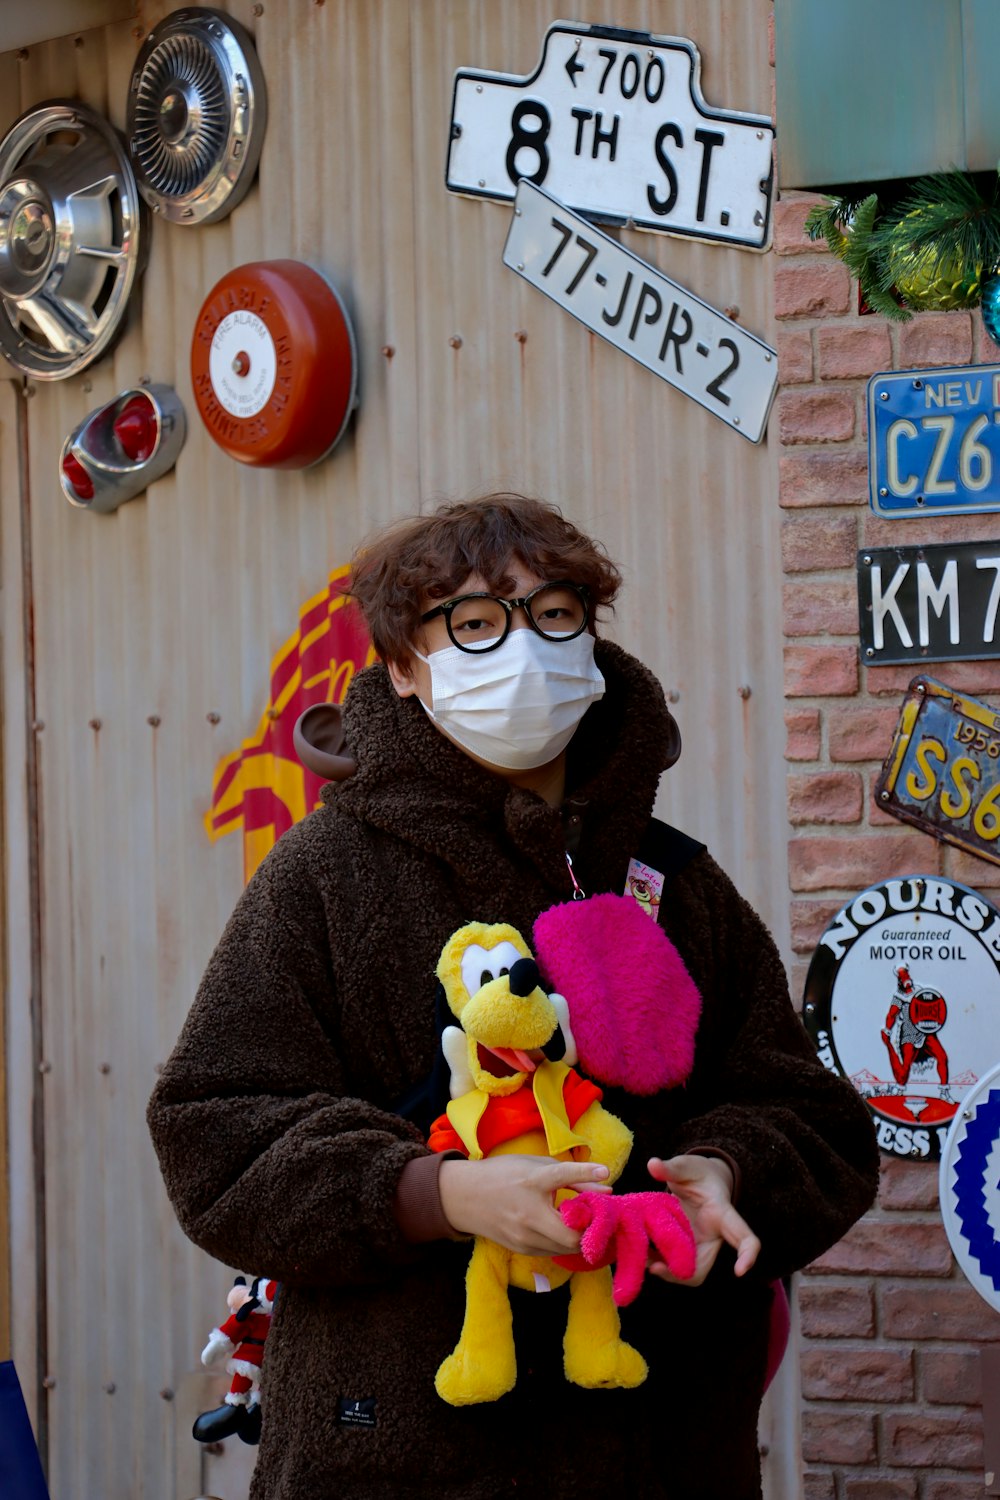 a person wearing a face mask holding a stuffed animal